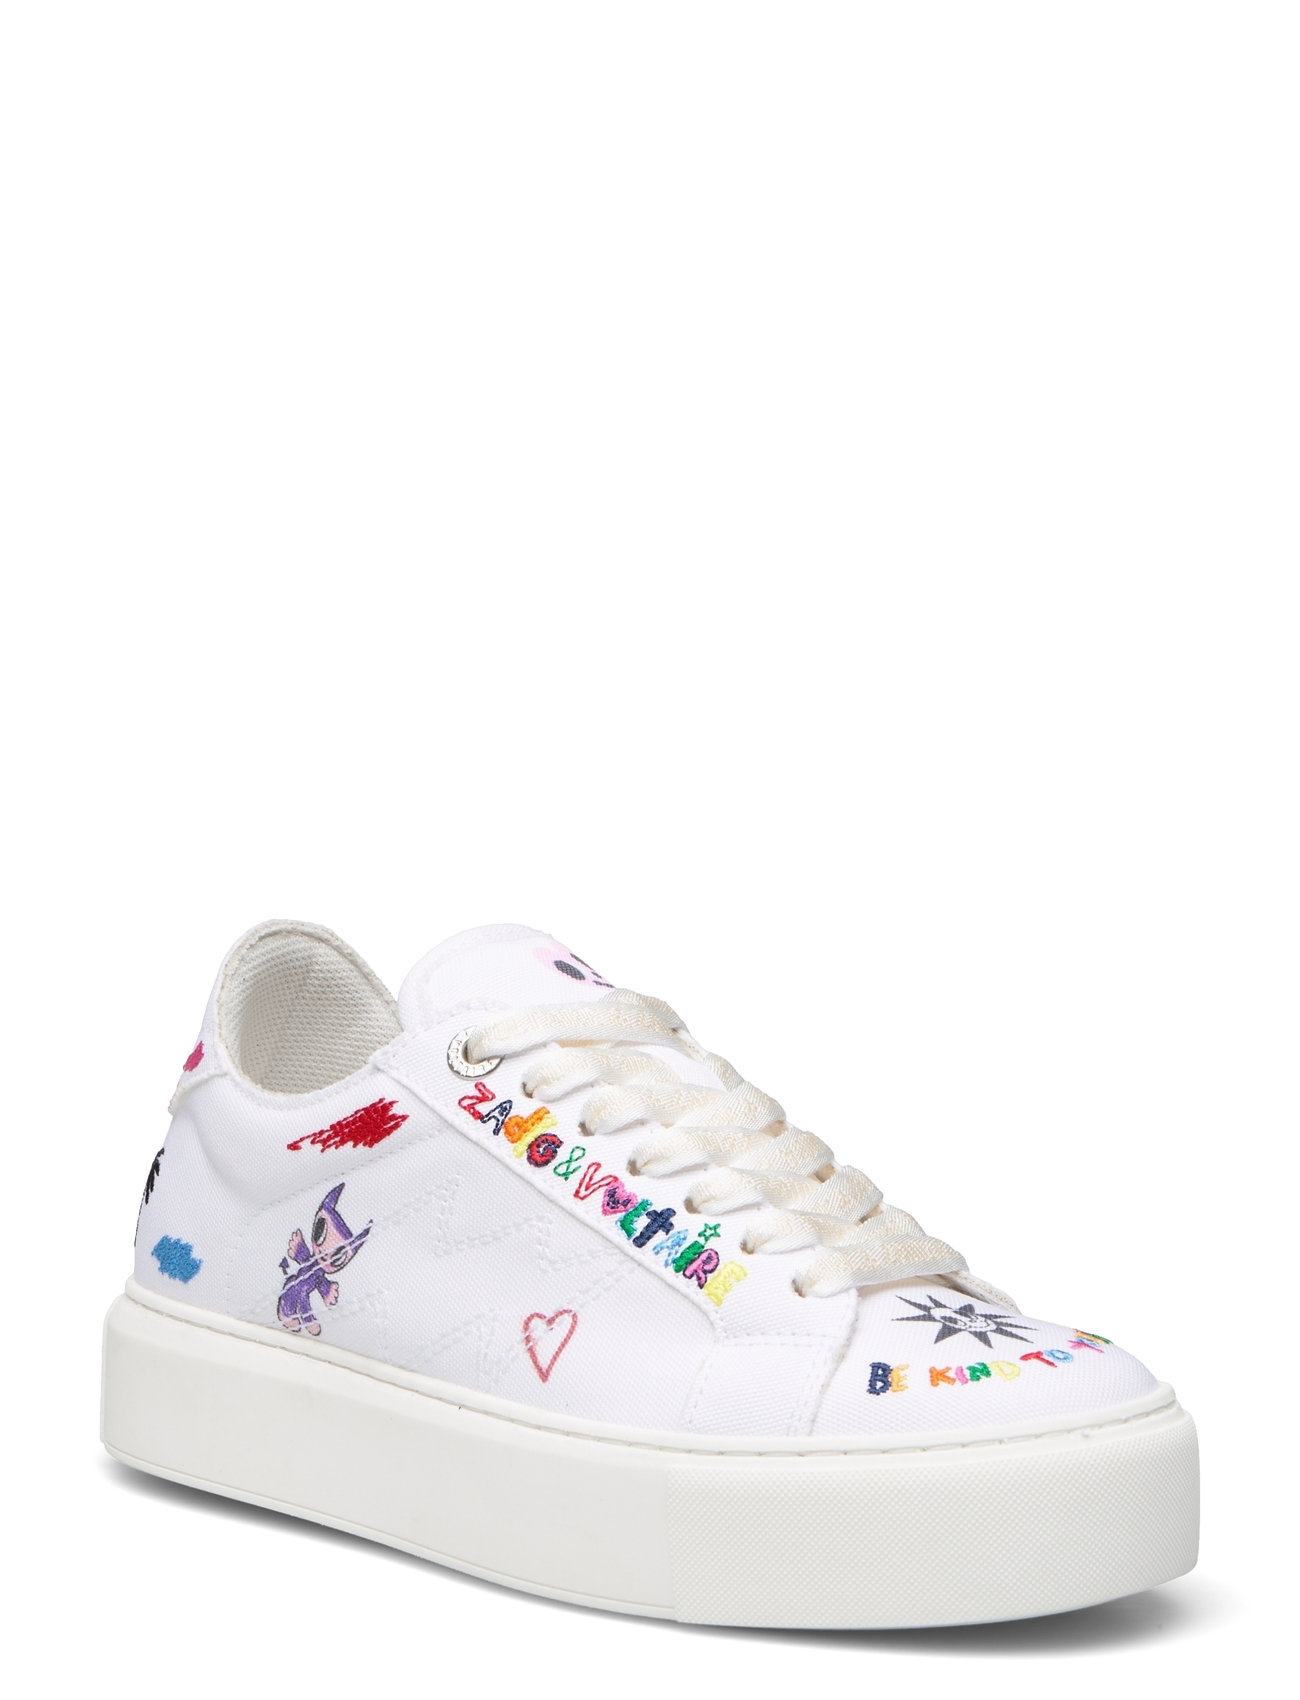 La Flash Chunky Canvas Humbert Designers Sneakers Chunky Sneakers White Zadig & Voltaire